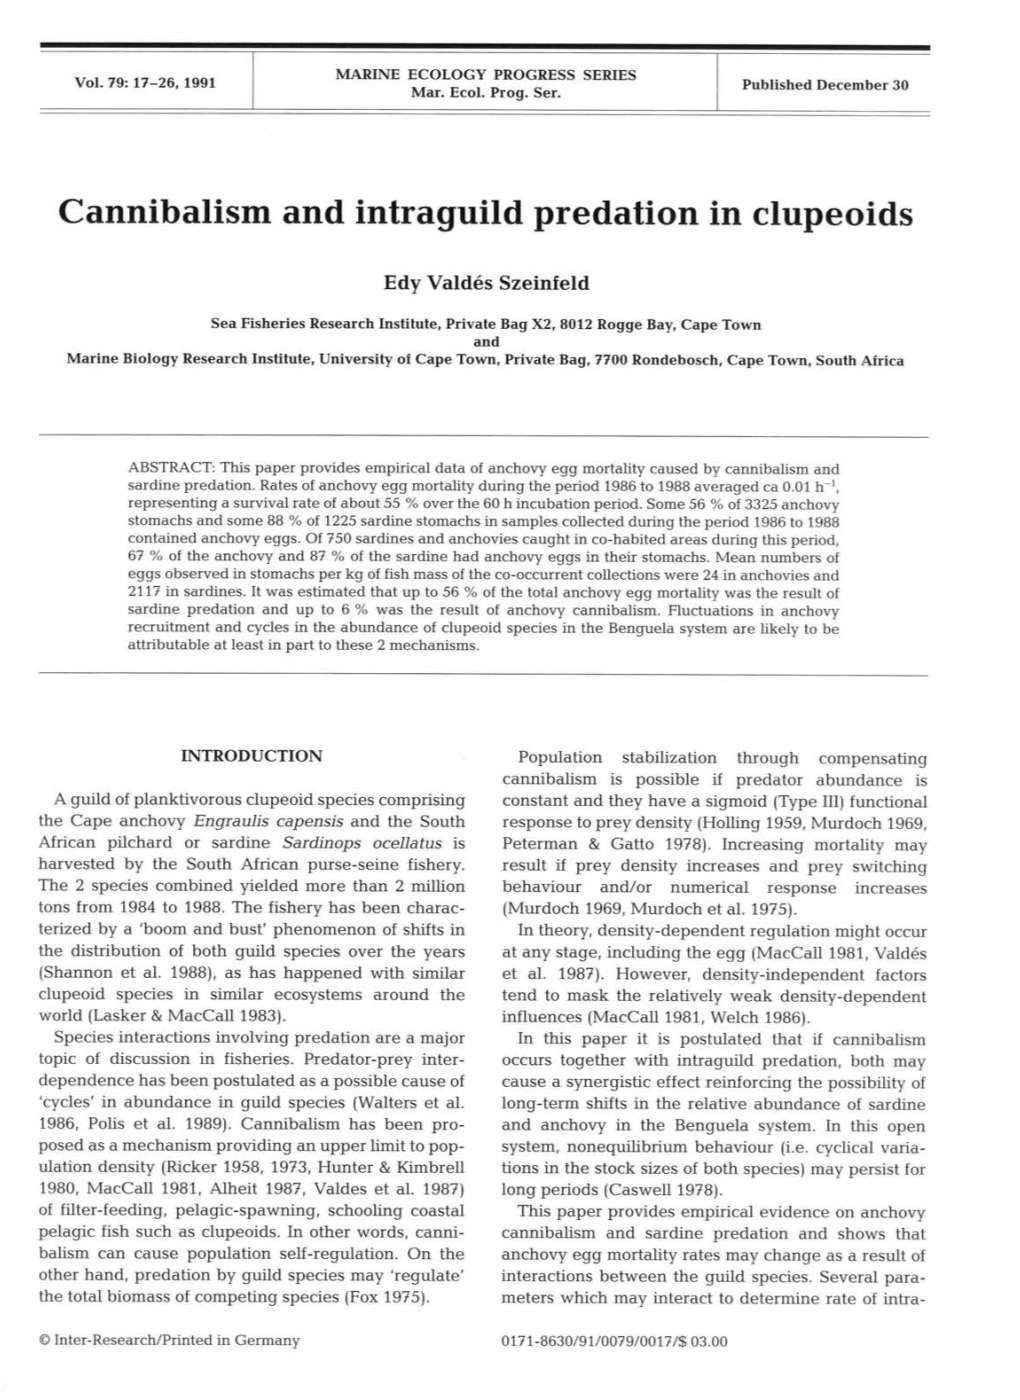 Cannibalism and Intraguild Predation in Clupeoids